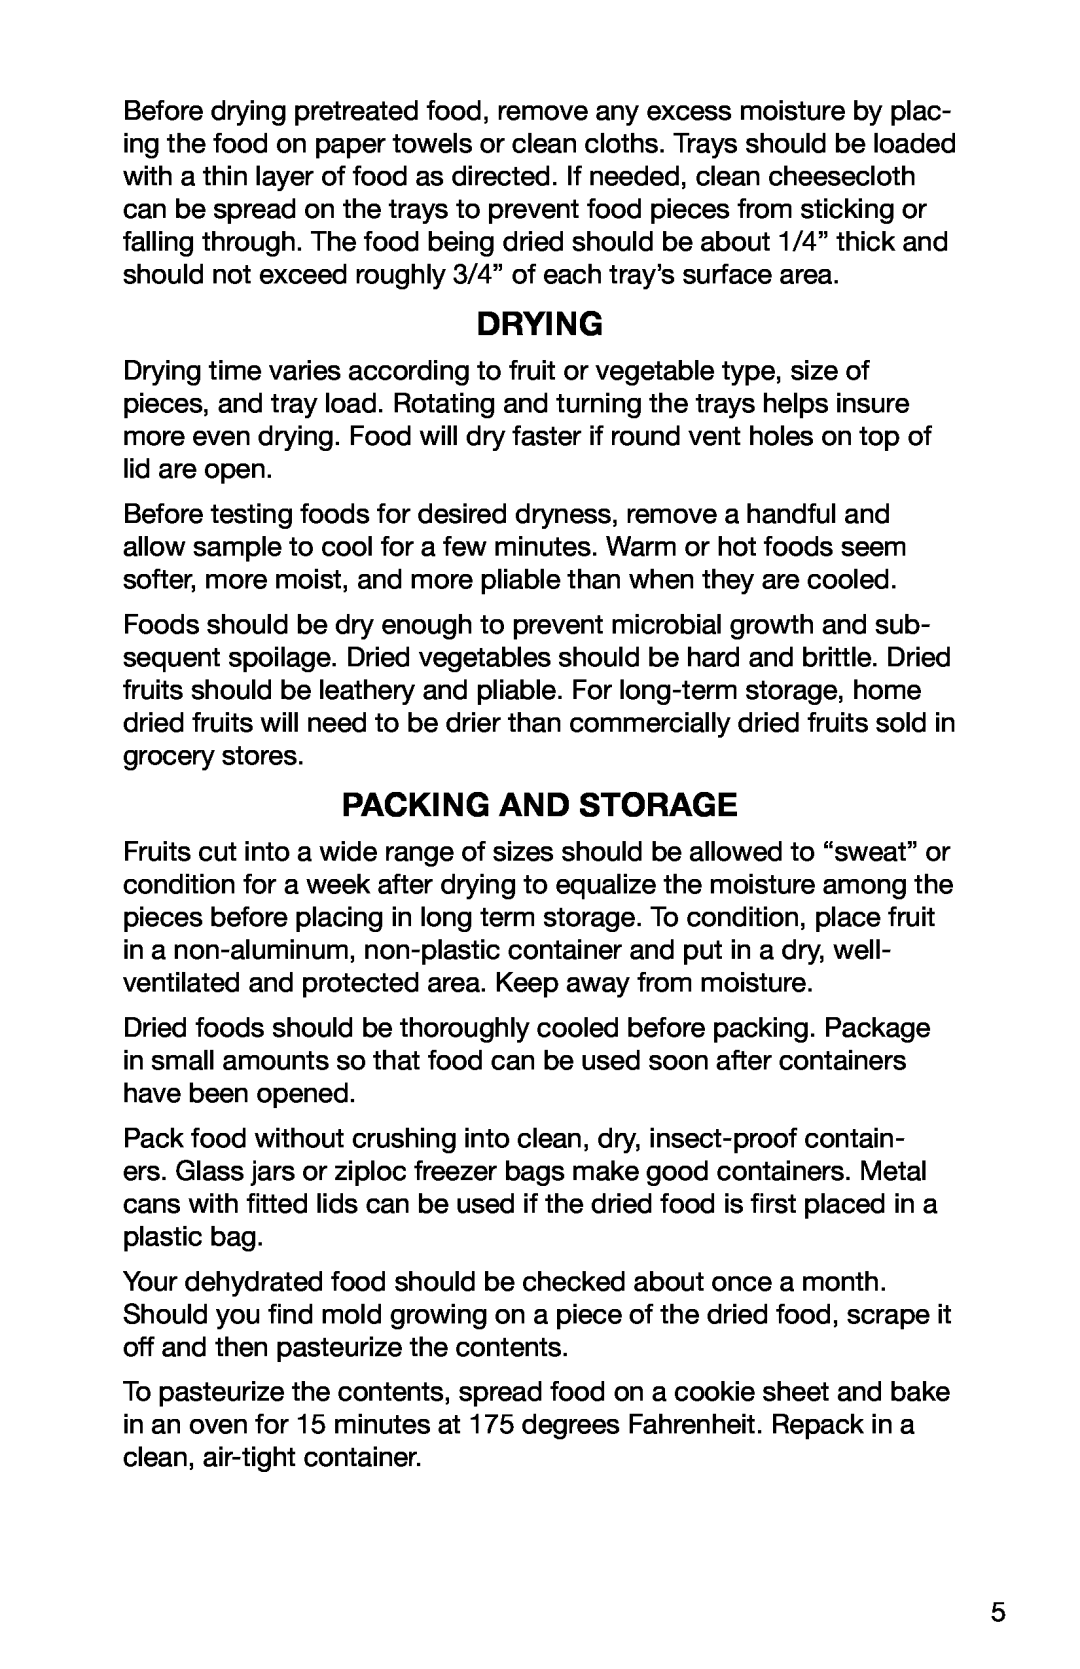 Ronco Food Saver manual Drying, Packing And Storage 